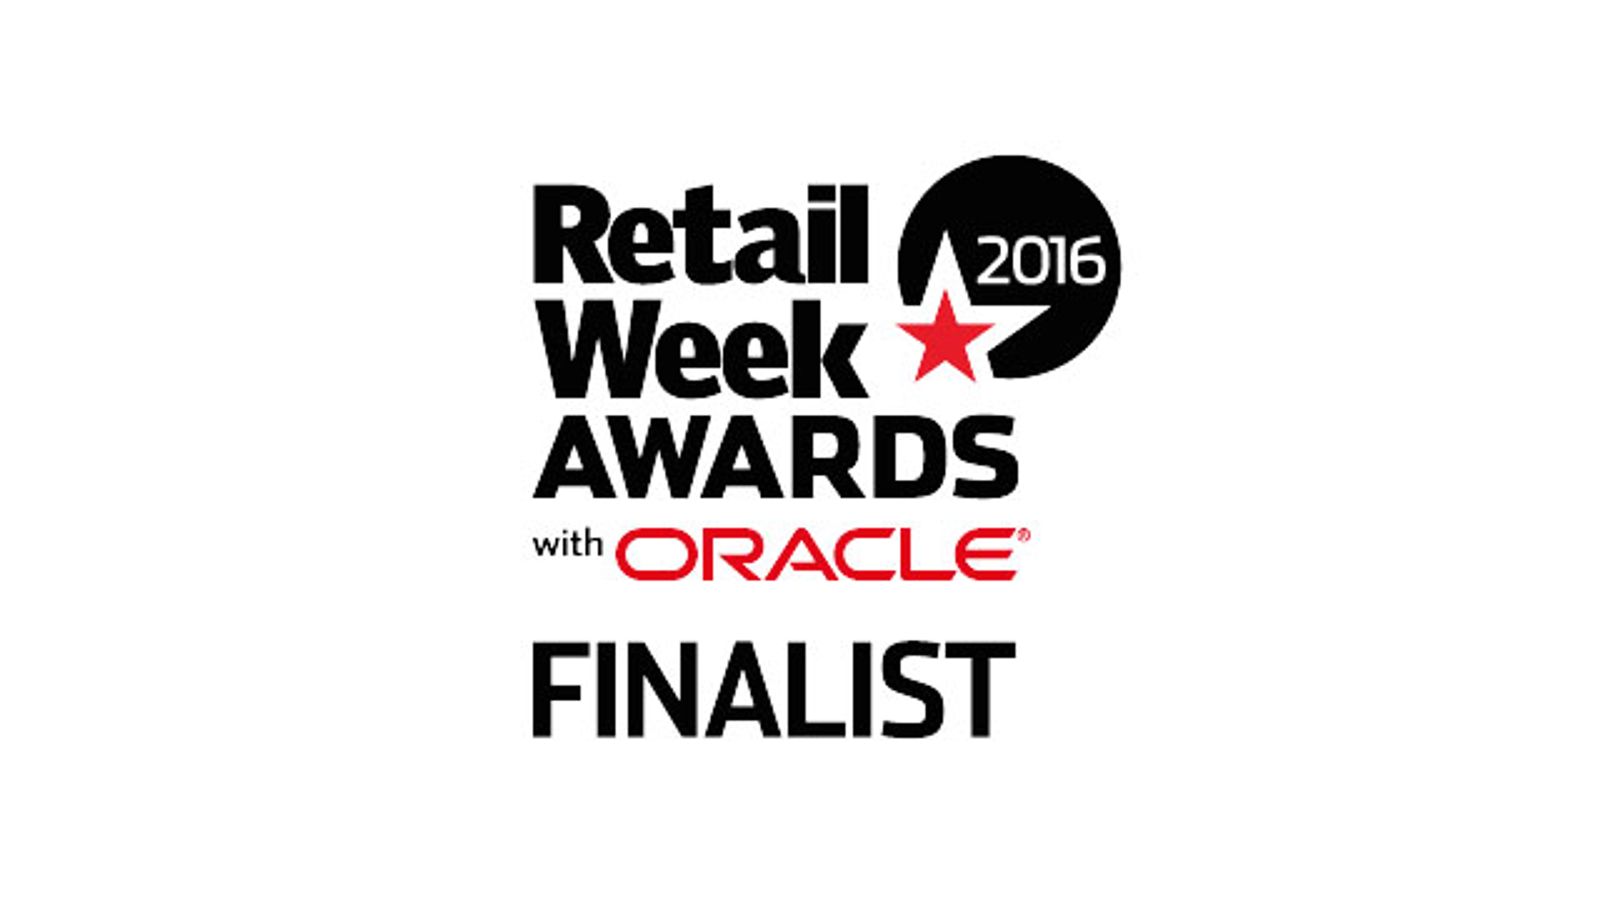 Lovehoney A Finalist In 2 Categories For Retail Week Awards With Oracle